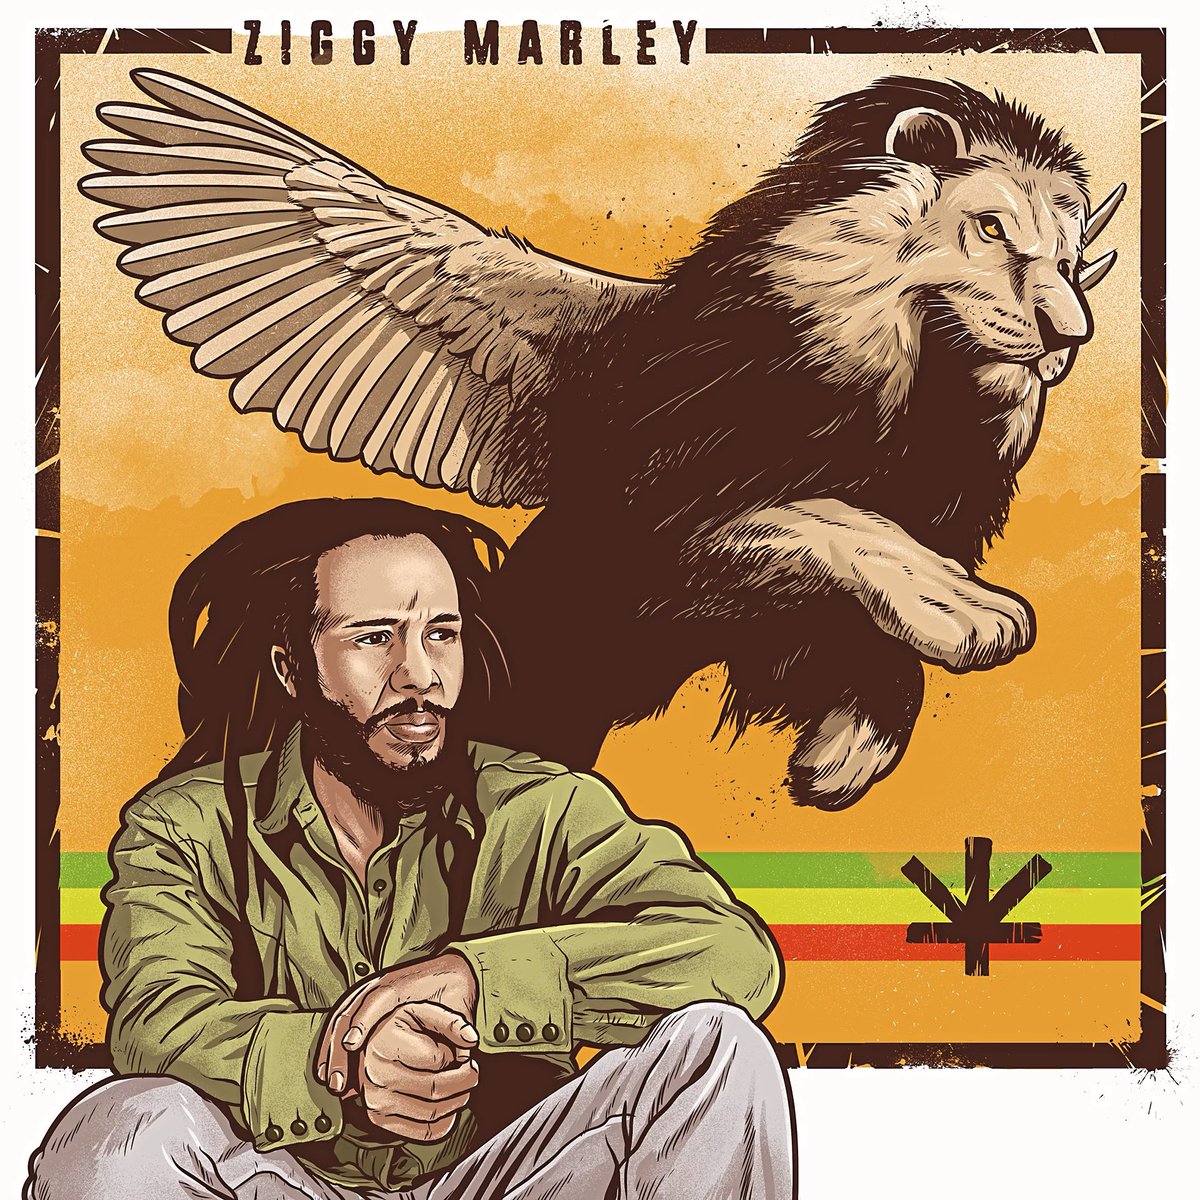 “I am a prisoner fighting to be free. I’m breaking out of captivity.” #BeFree @ziggymarley 🎨 by Anthony Moss